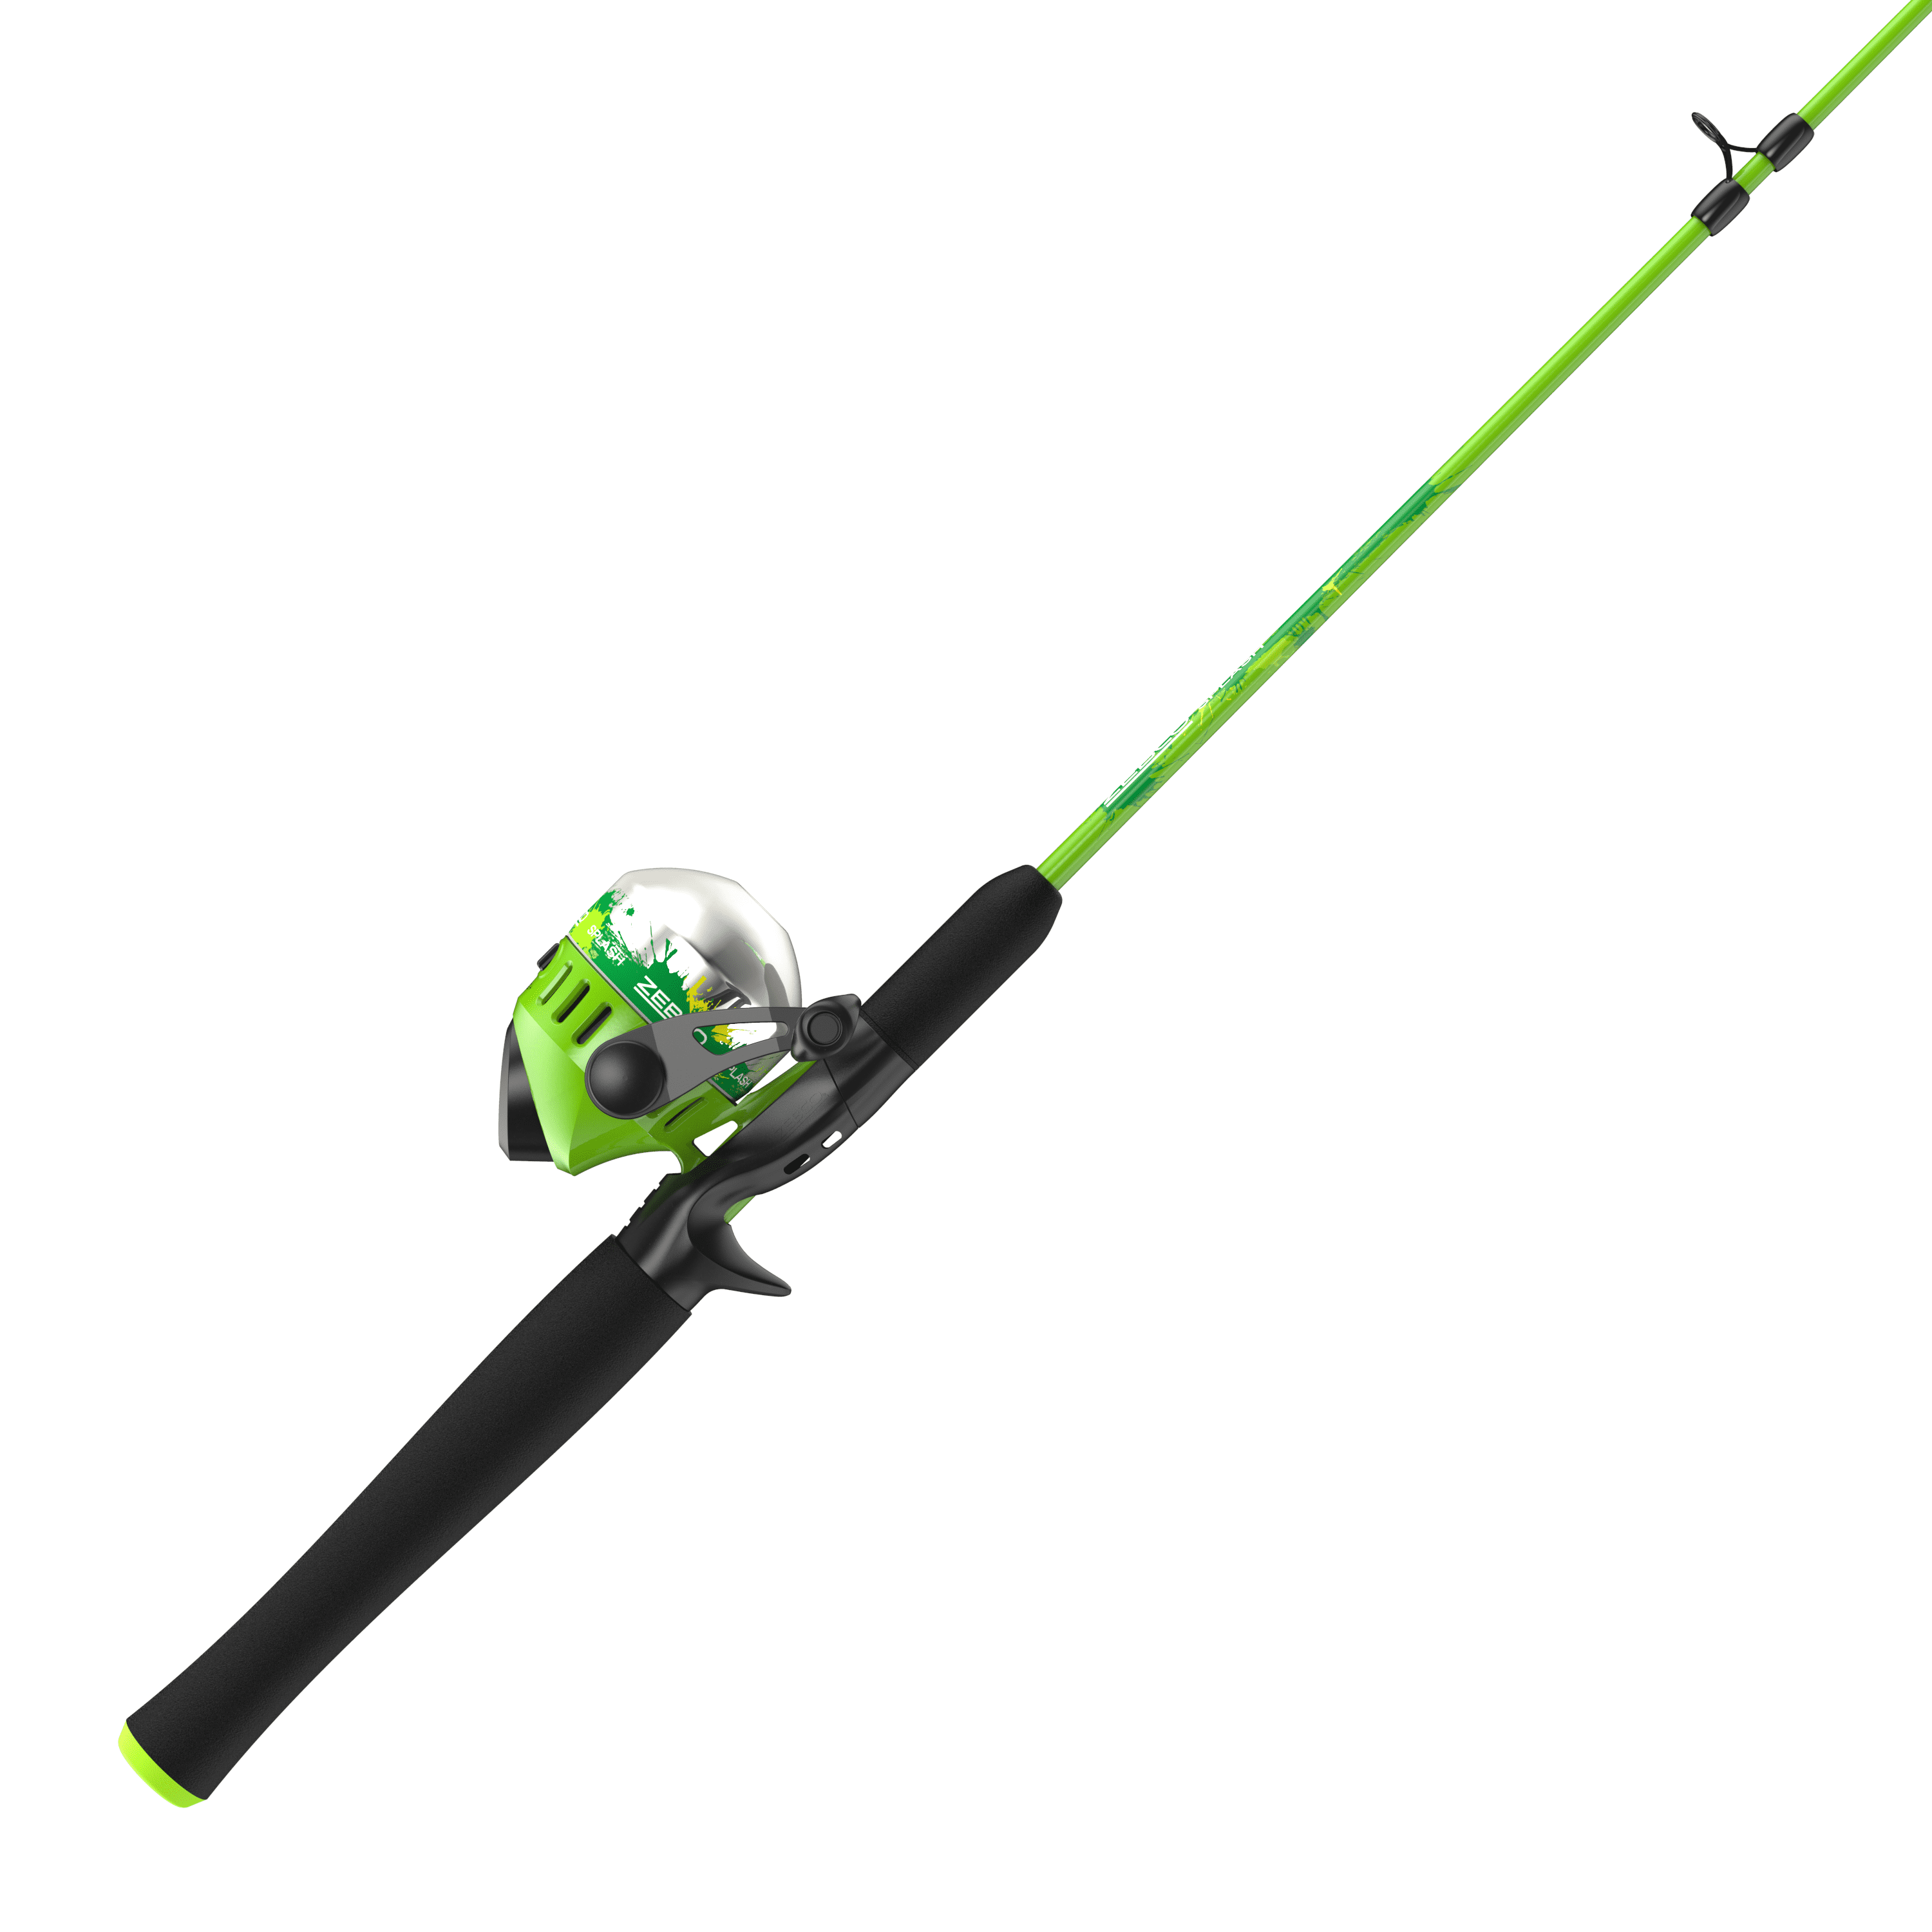 Zebco Splash Spincast Reel and Fishing Rod Combo, 6-Foot 2-Piece Fishing  Pole, Size 30 Reel, Changeable Right- or Left-Hand Retrieve, Pre-Spooled  with 